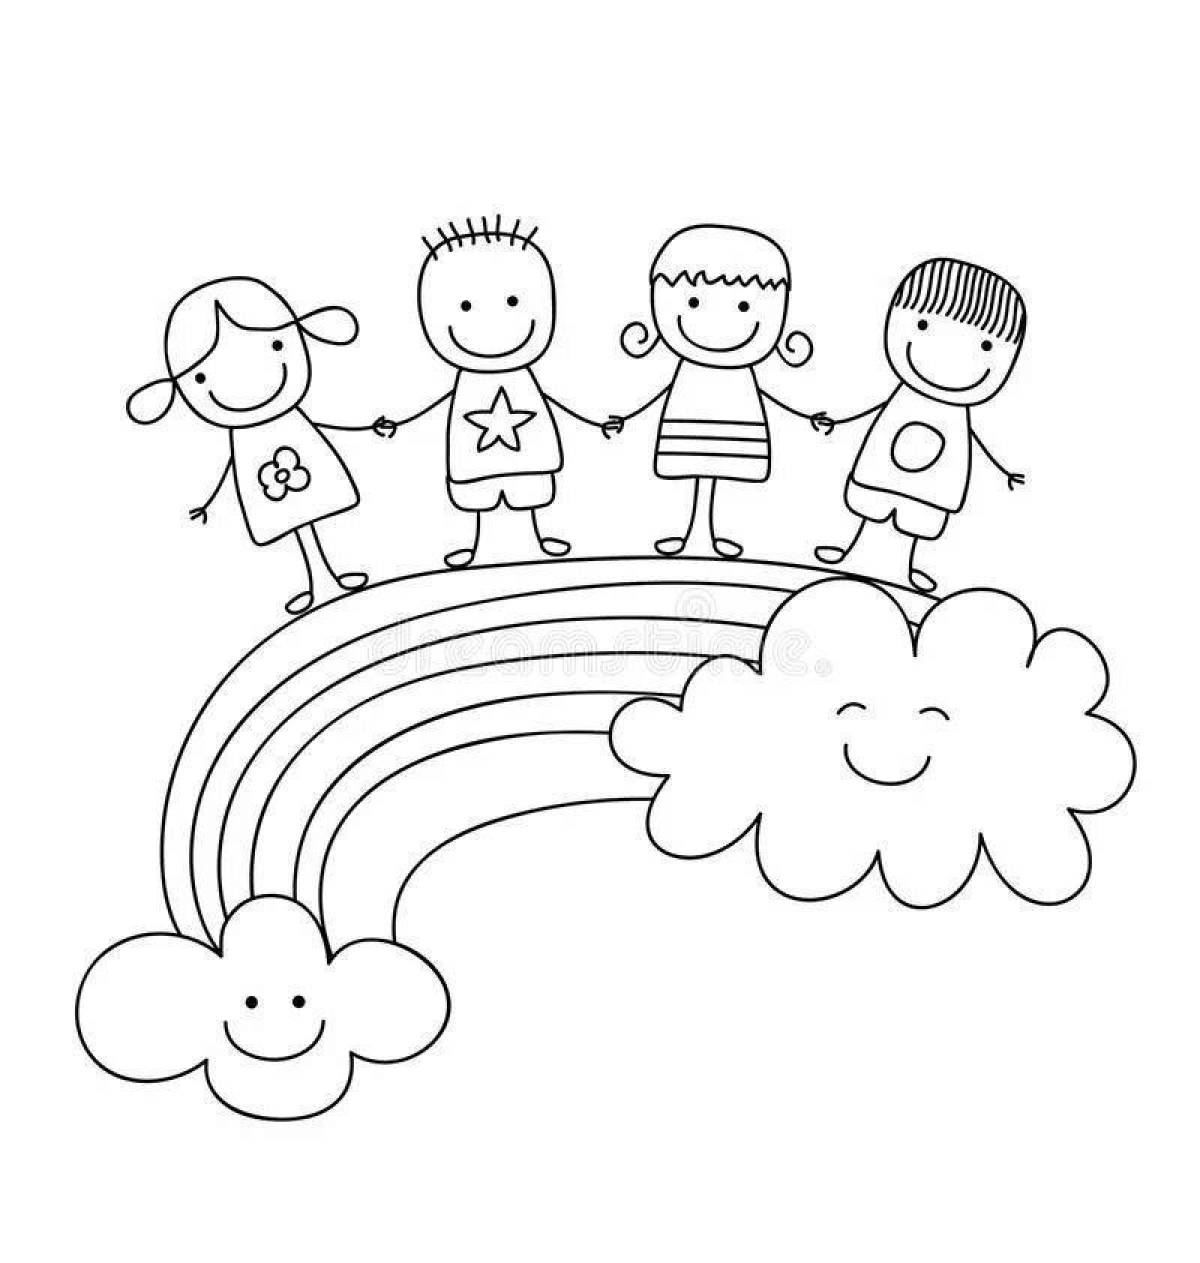 Rainbow friends coloring pages with crazy coloring